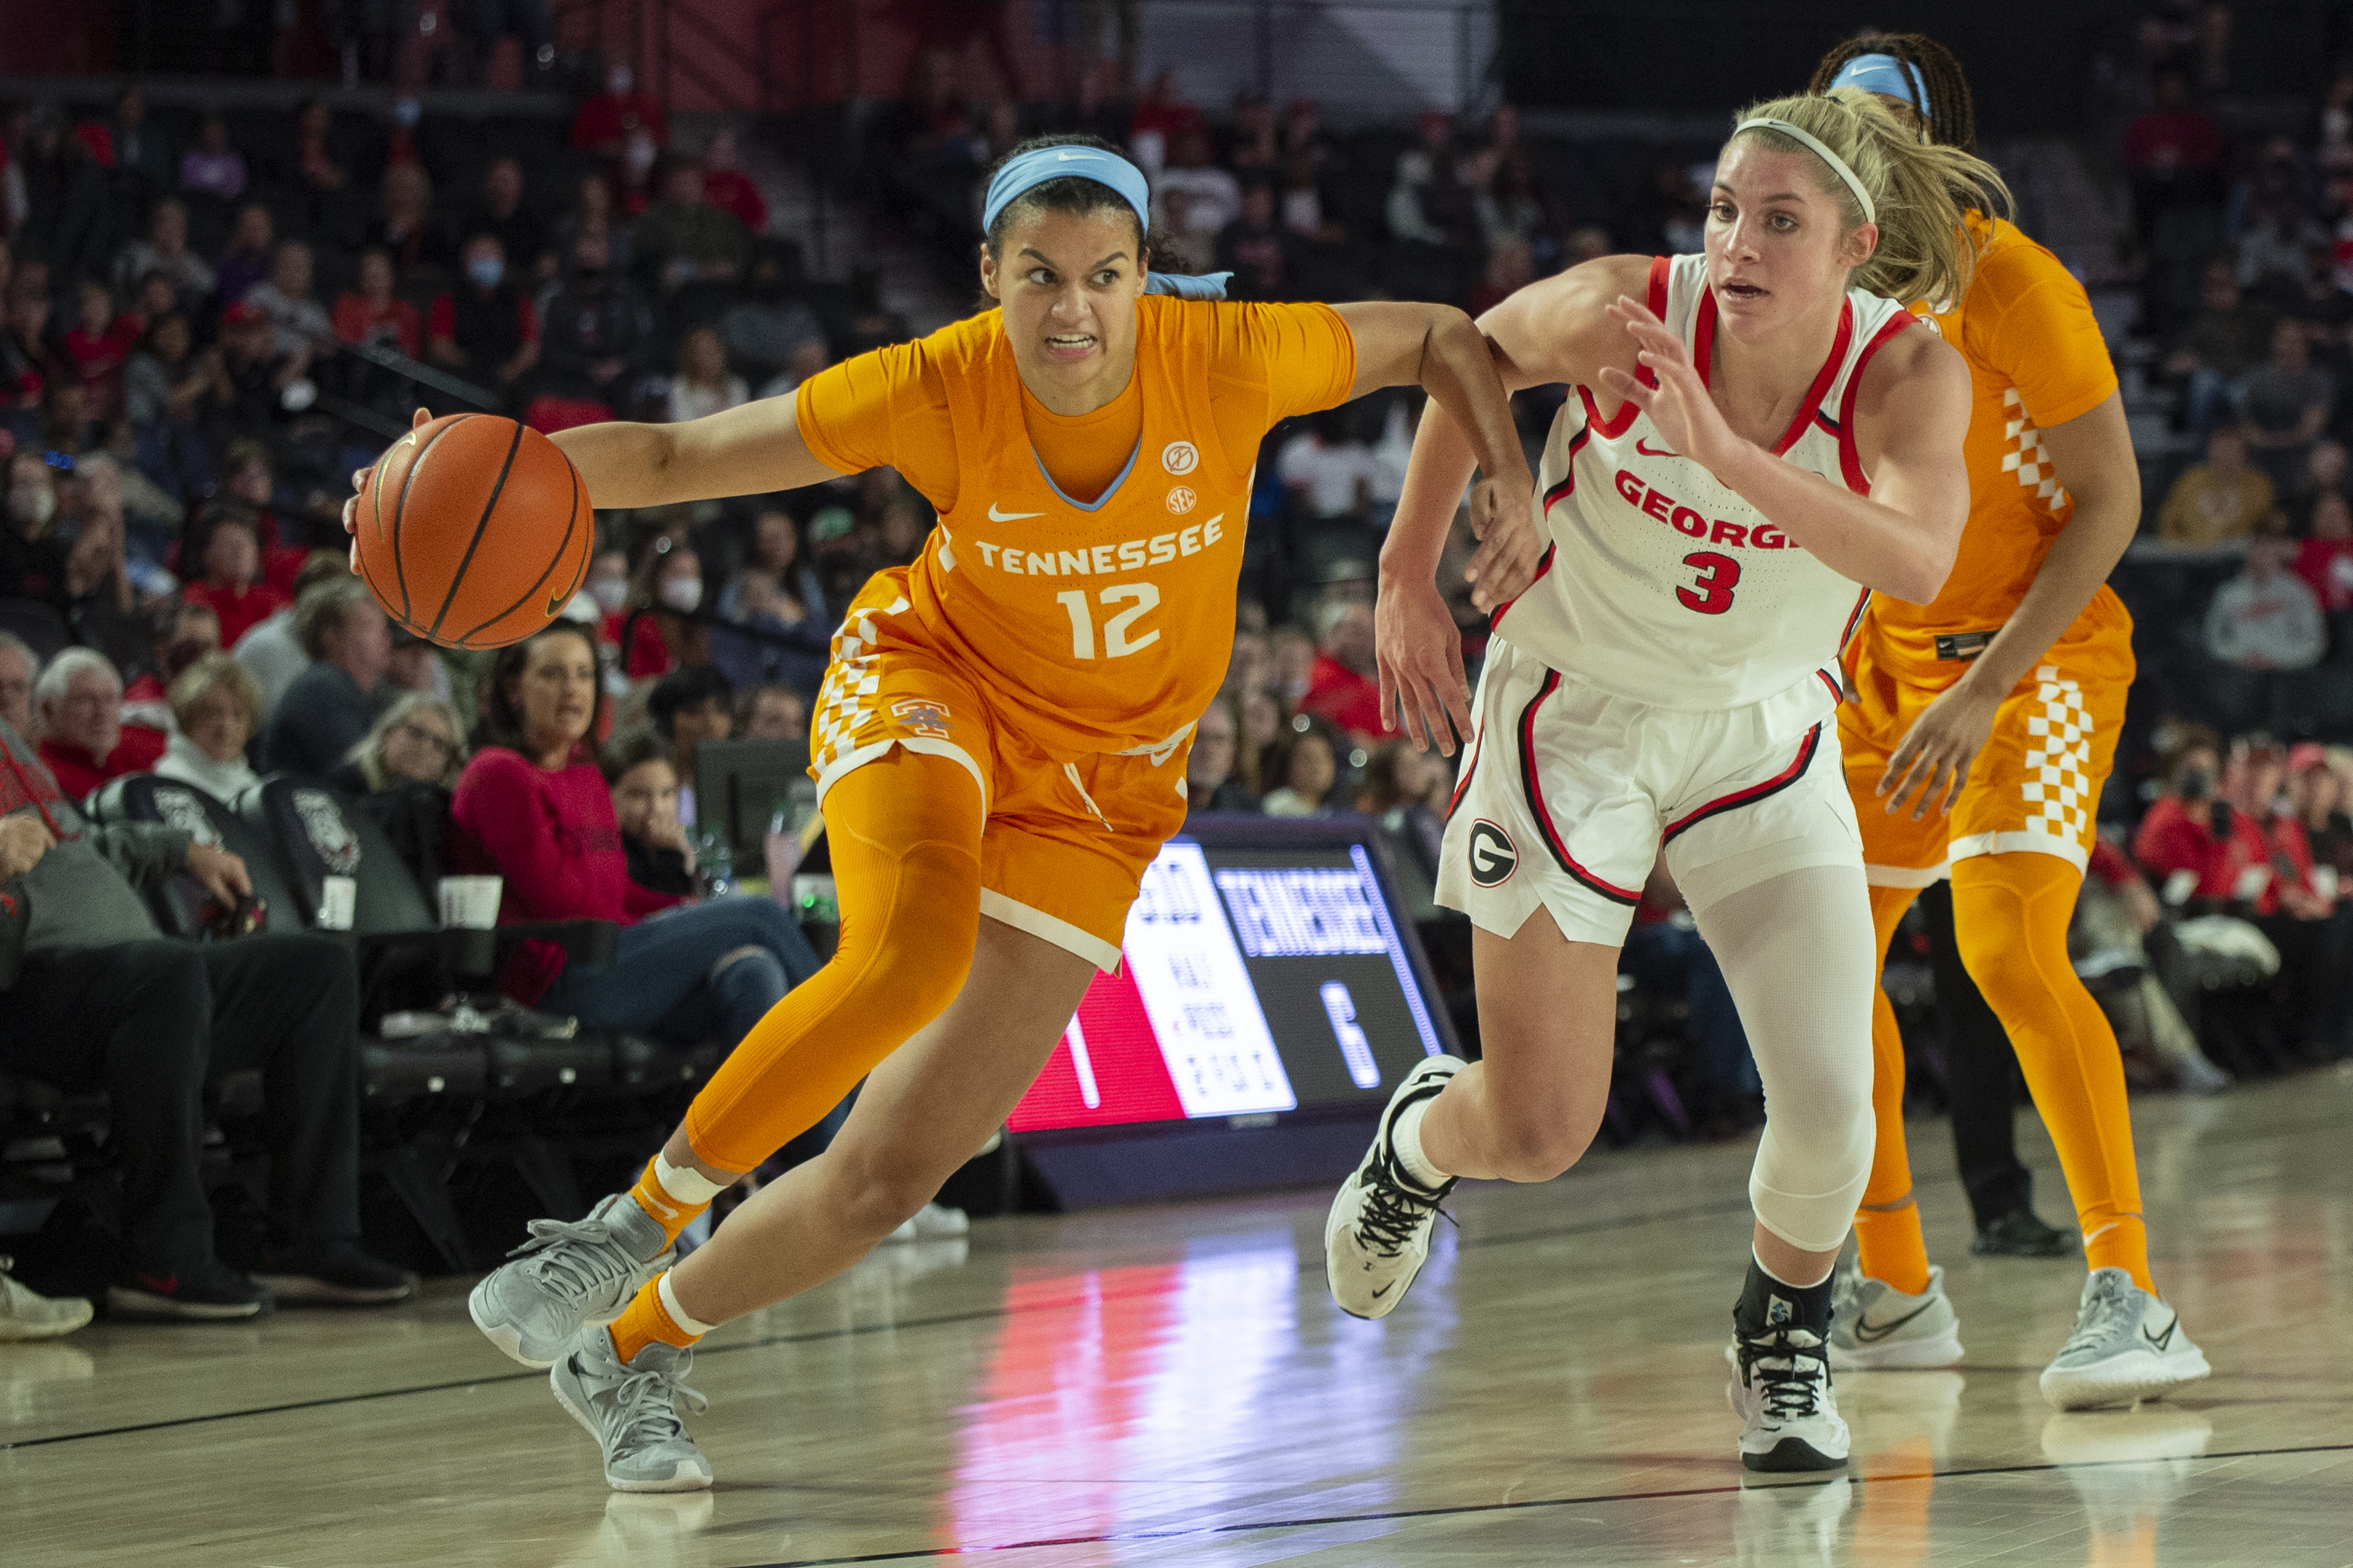 watch lady vols basketball game today